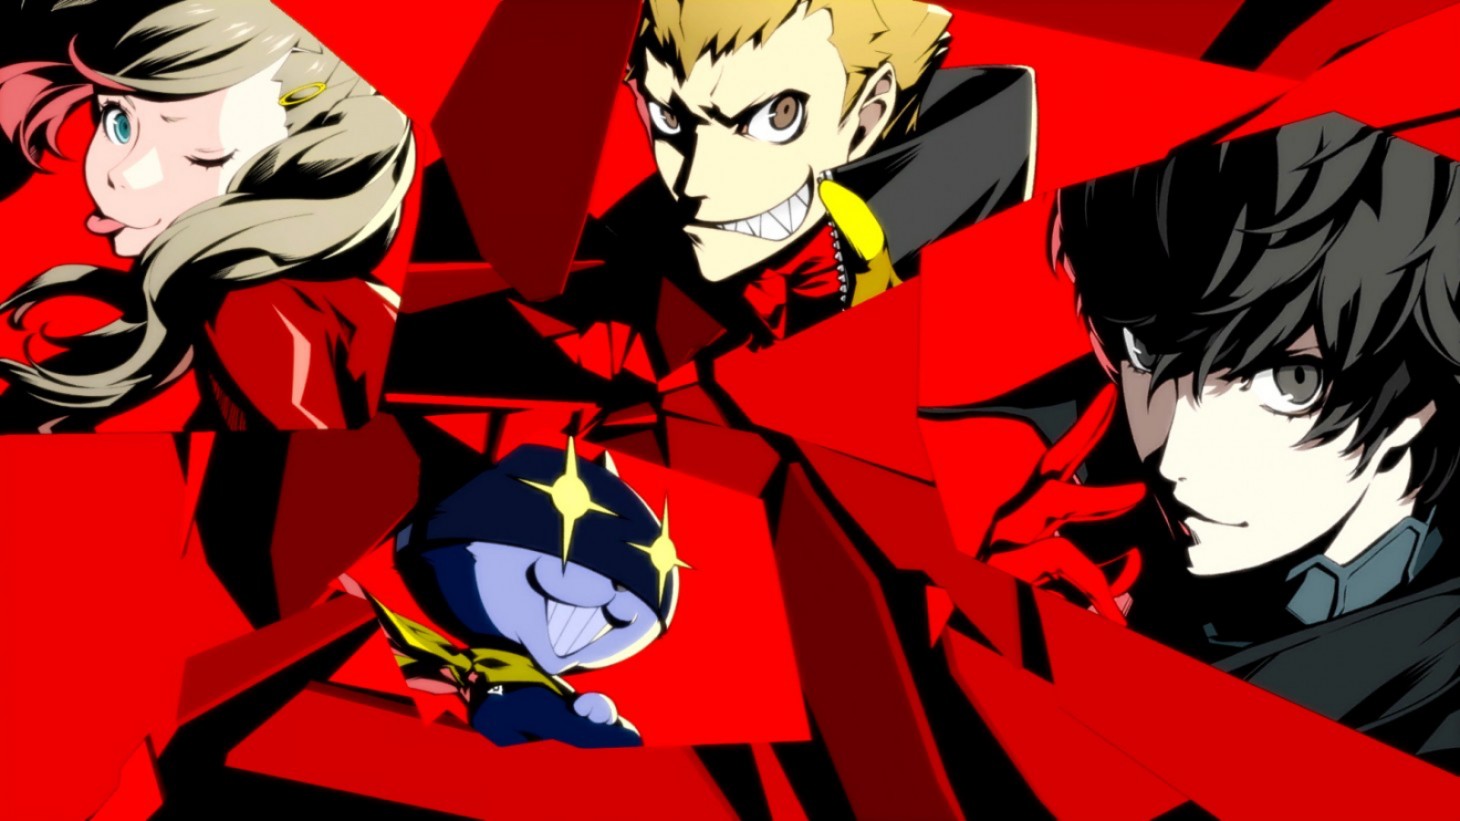 Check Out Persona 5 Royal Running At 60 FPS On Xbox Series X - Game Informer